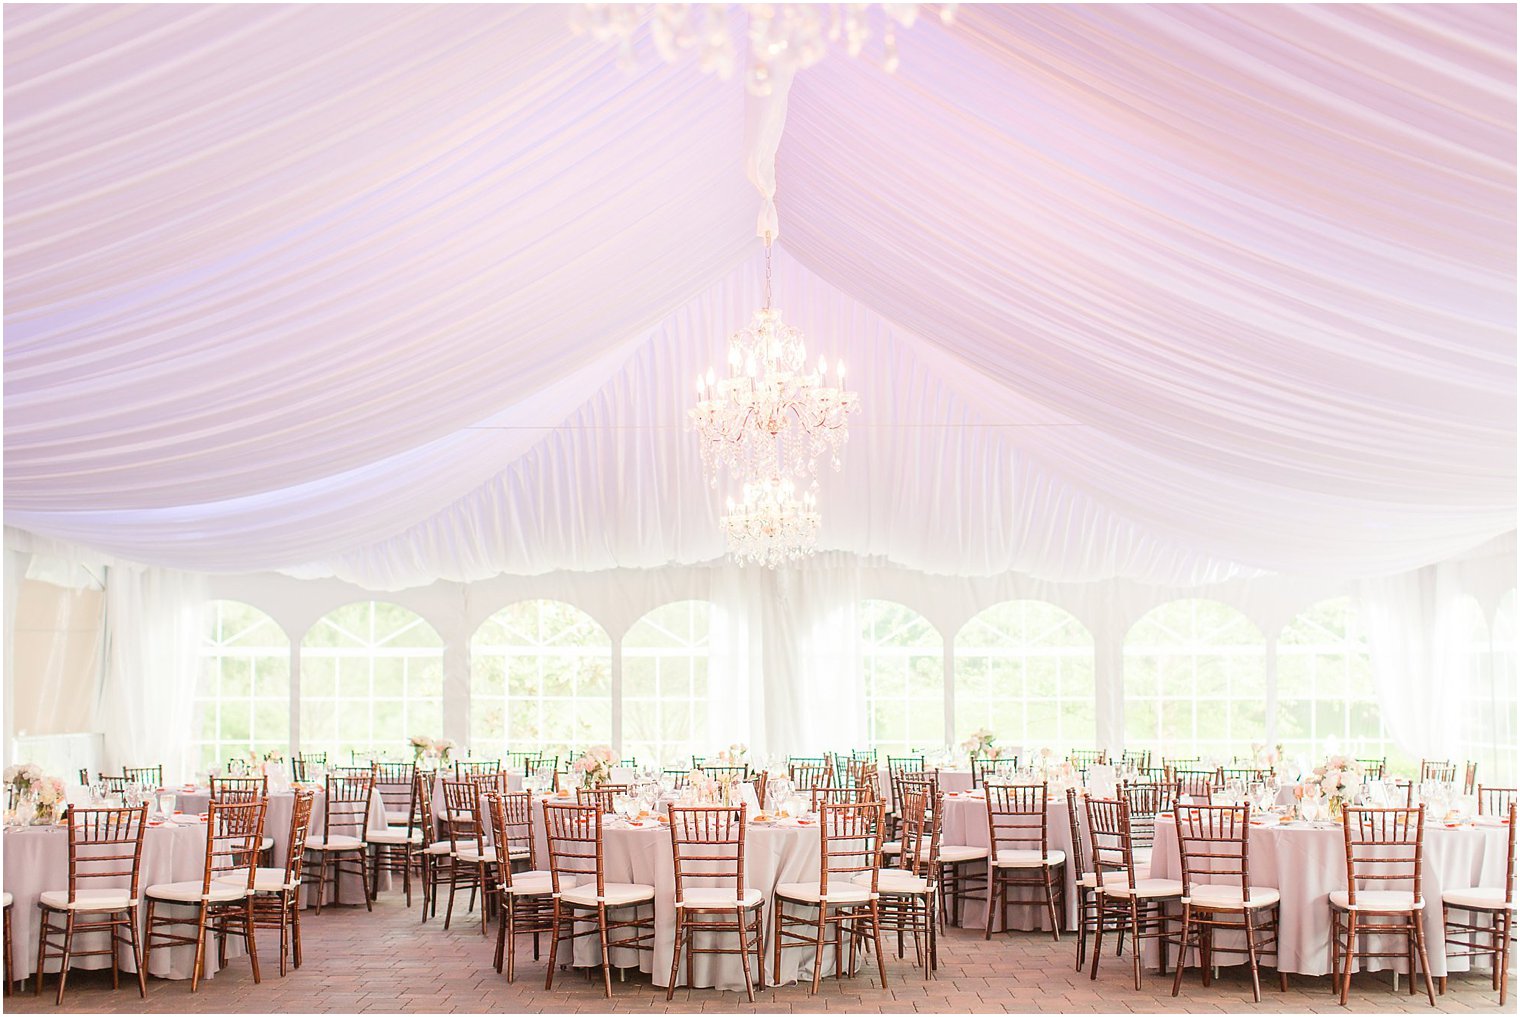 Tented reception at Windows on the Water at Frogbridge